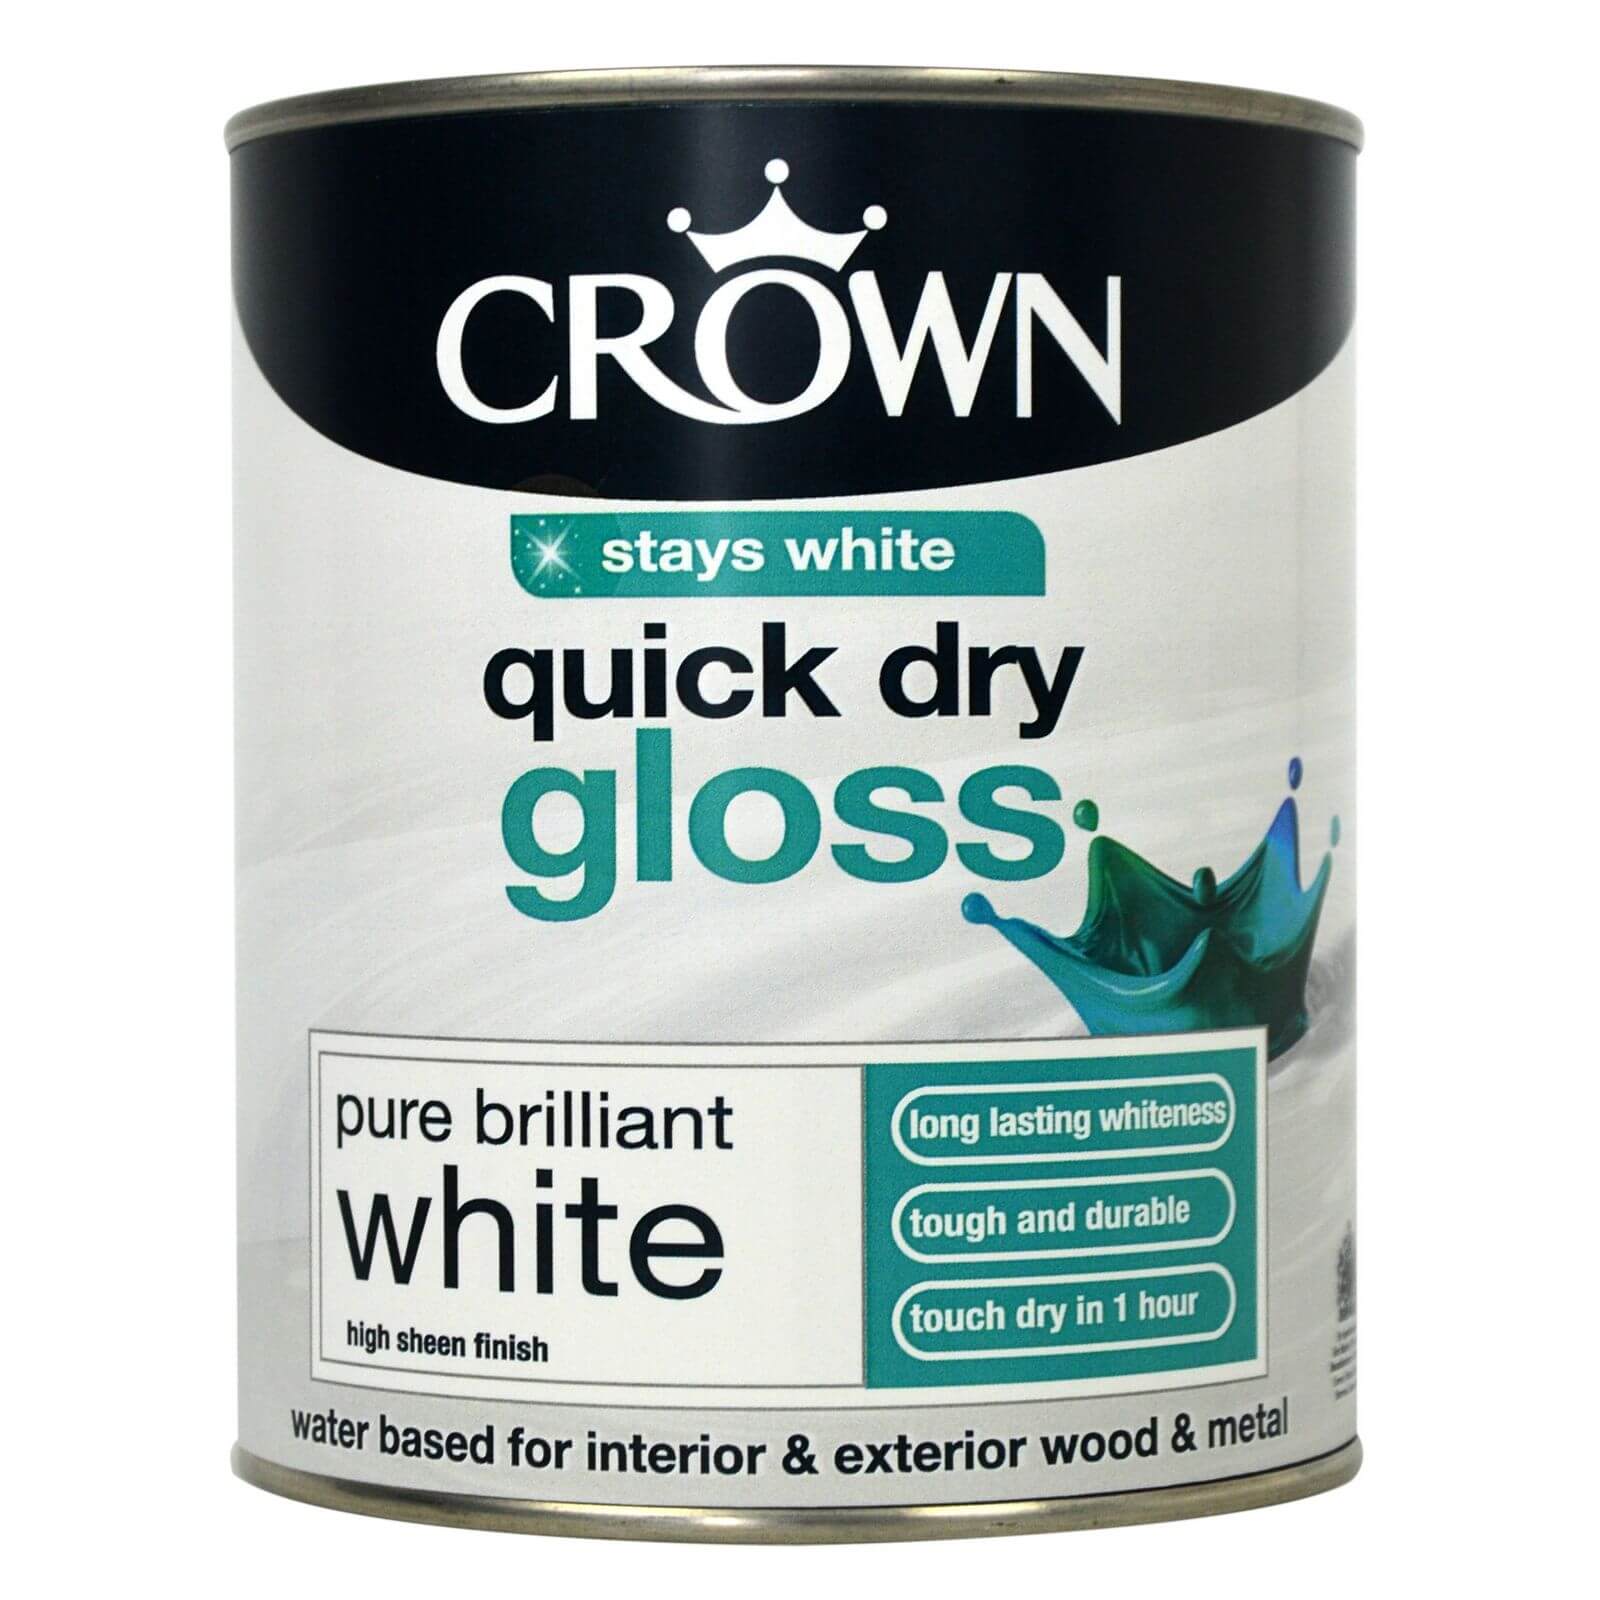 Crown Quick Drying Gloss Paint Pure Brilliant White - 750ml